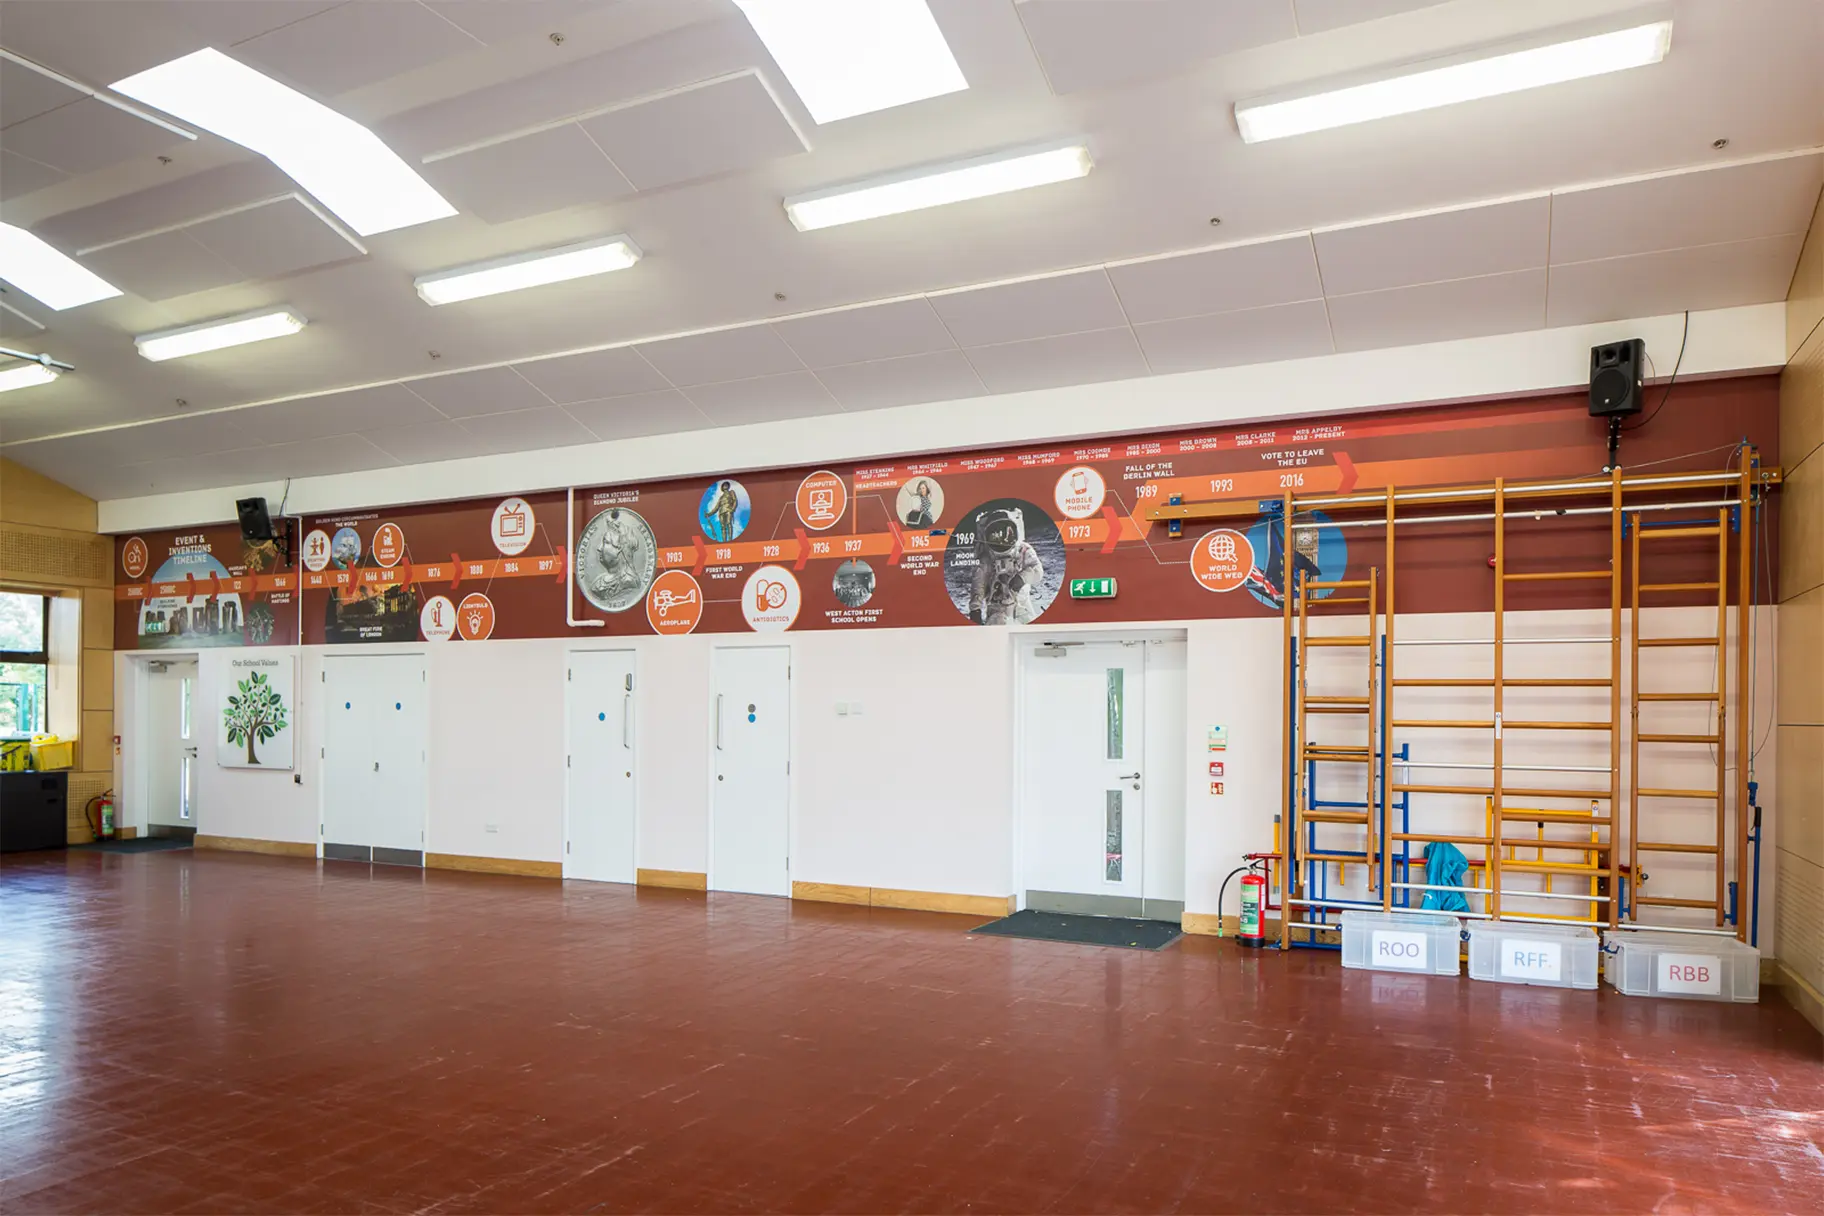 West Acton Primary bespoke history subject timeline school wall art